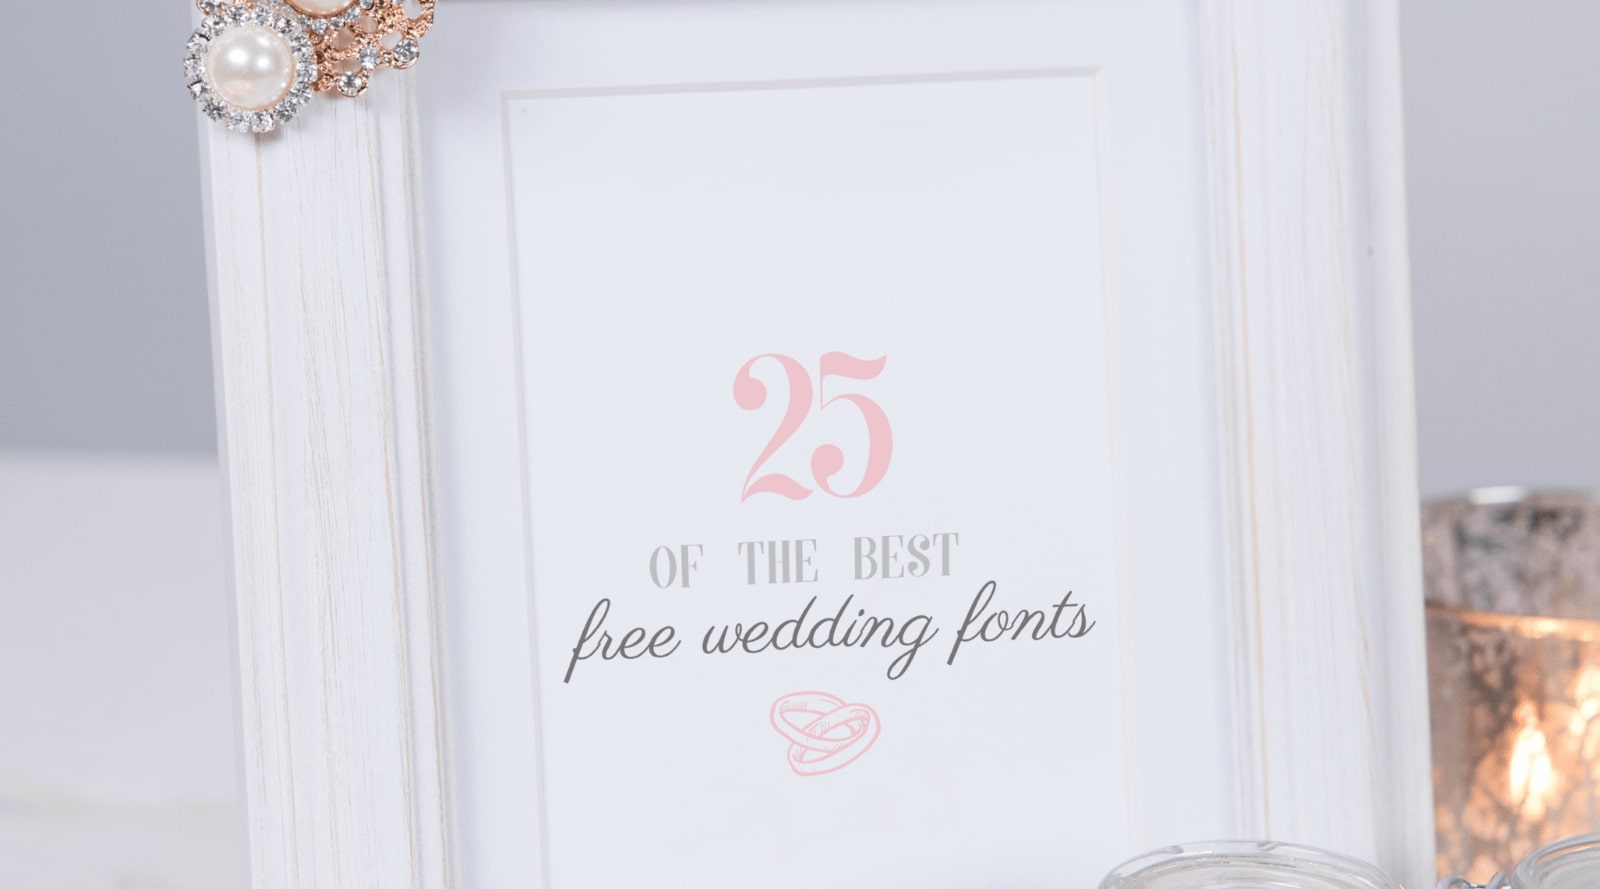 25 of the best free wedding fonts